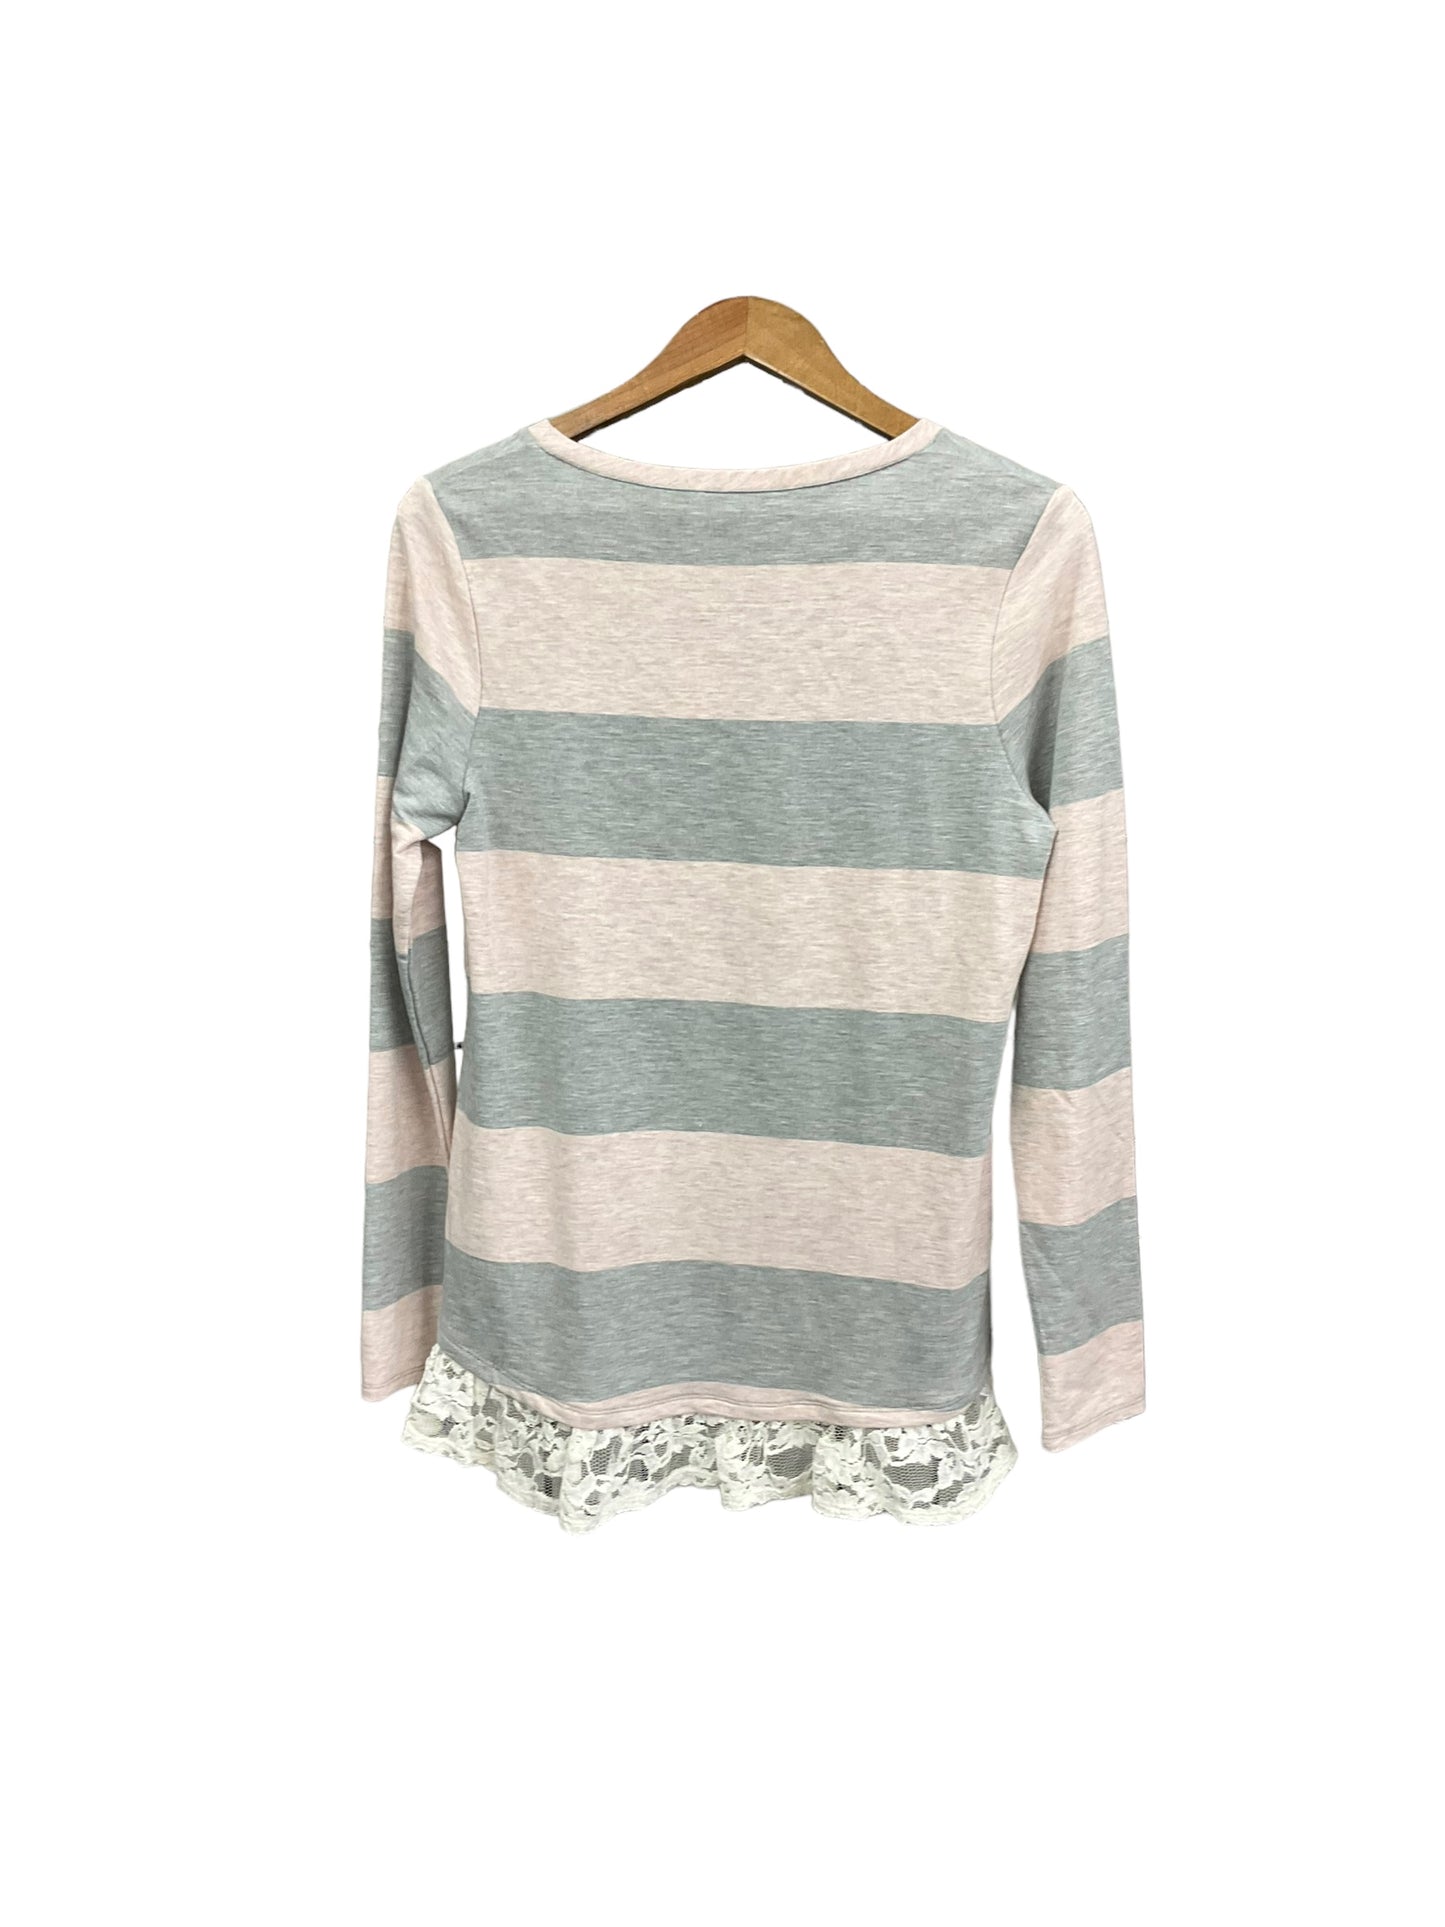 Top Long Sleeve By Cato  Size: S